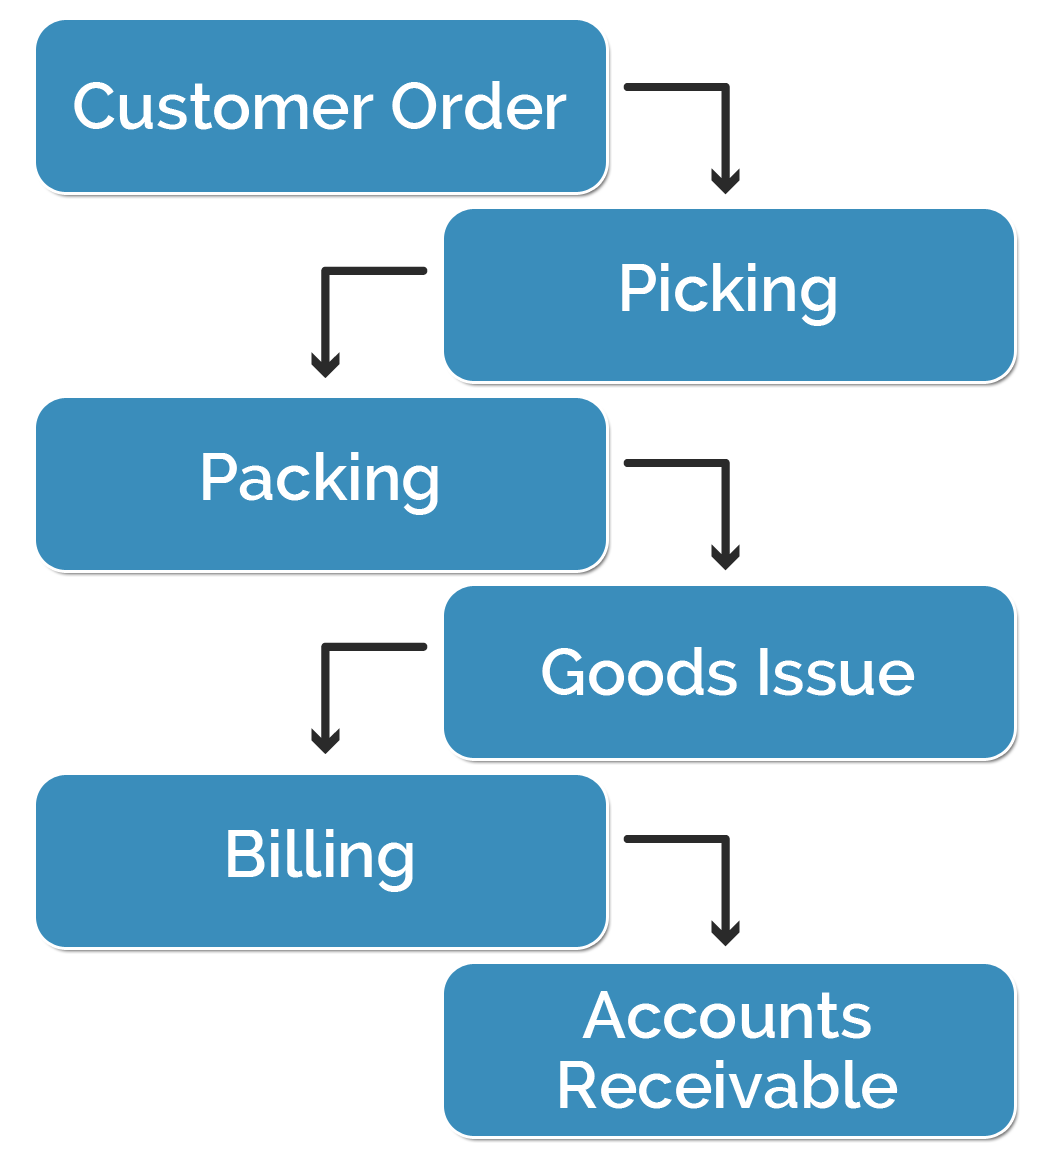 Sales Process - Trading Goods